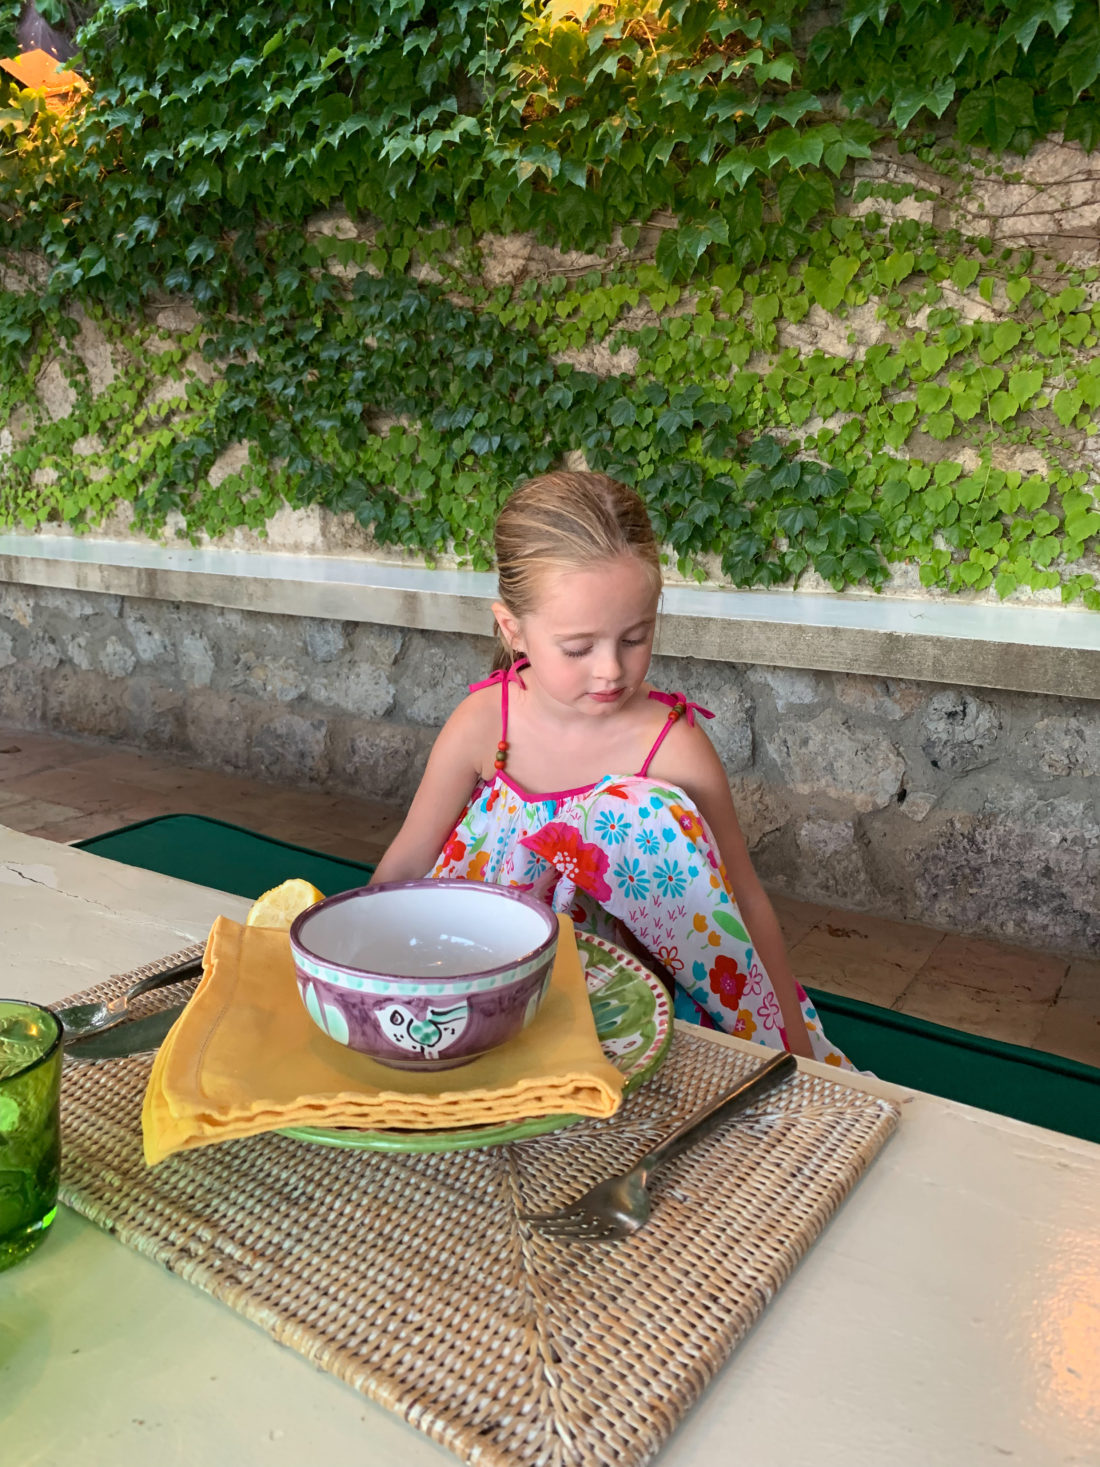 Marlowe Martino enjoying some lunch by the water in Italy